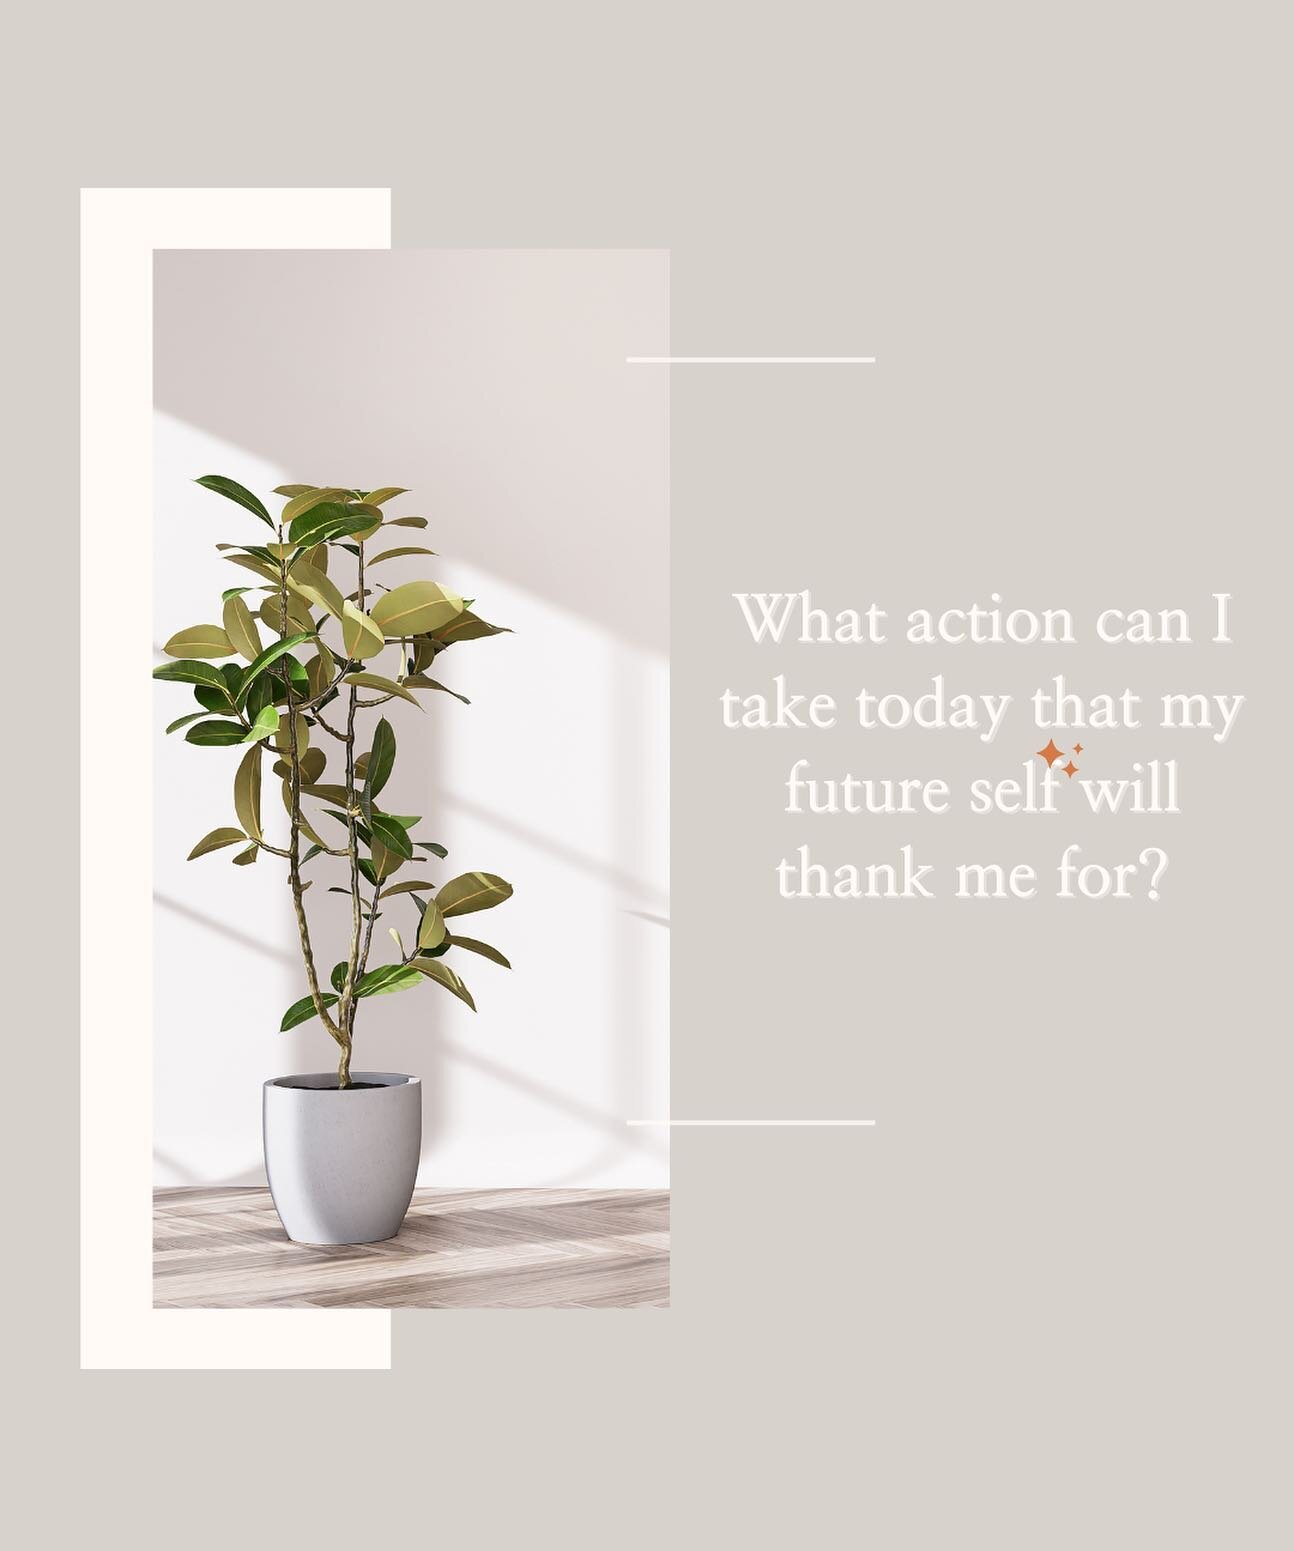 𝑭𝒐𝒐𝒅 𝒇𝒐𝒓 𝒕𝒉𝒐𝒖𝒈𝒉𝒕 💭 

This question can be applied to just about any scenario: ask yourself &ldquo;What will my future self thank me for?&rdquo;

With organization- a little bit of extra effort in your small daily habits will lead to ex